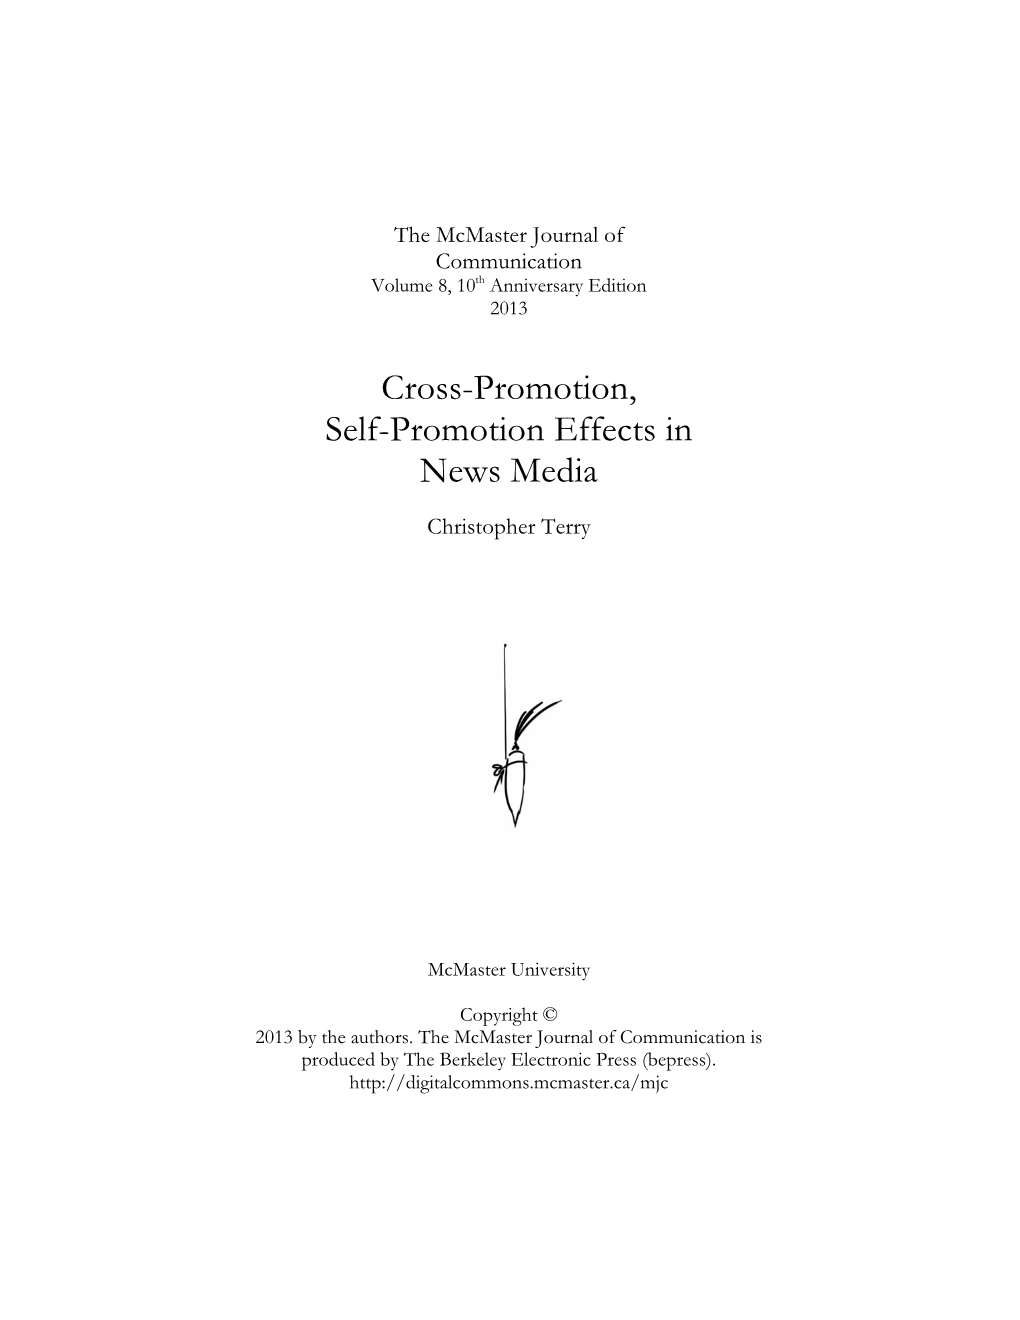 Cross-Promotion, Self-Promotion Effects in News Media